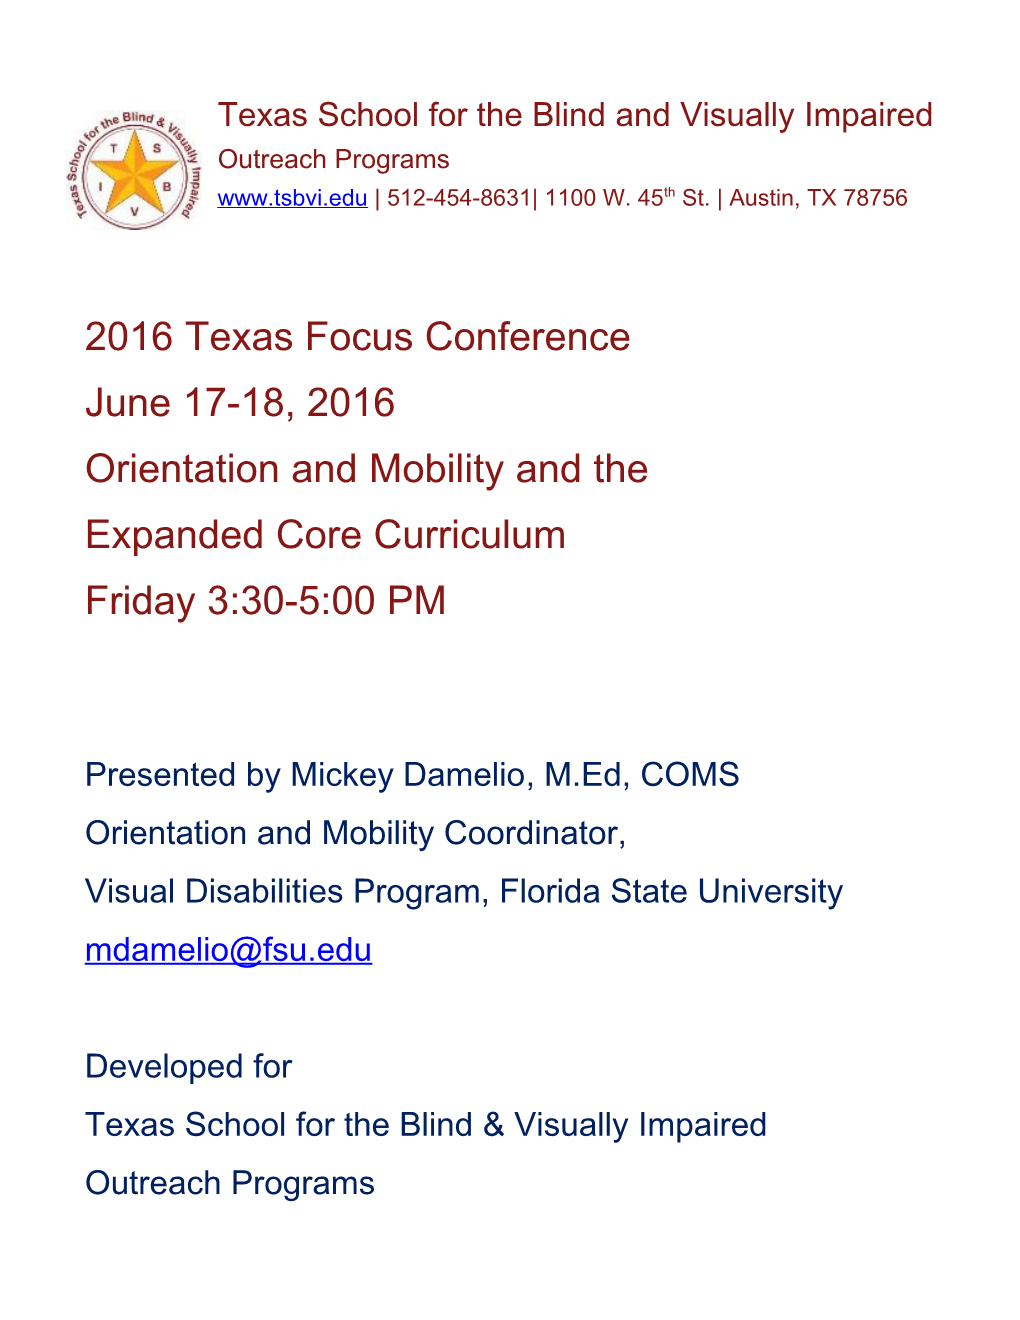 Orientation and Mobility and The